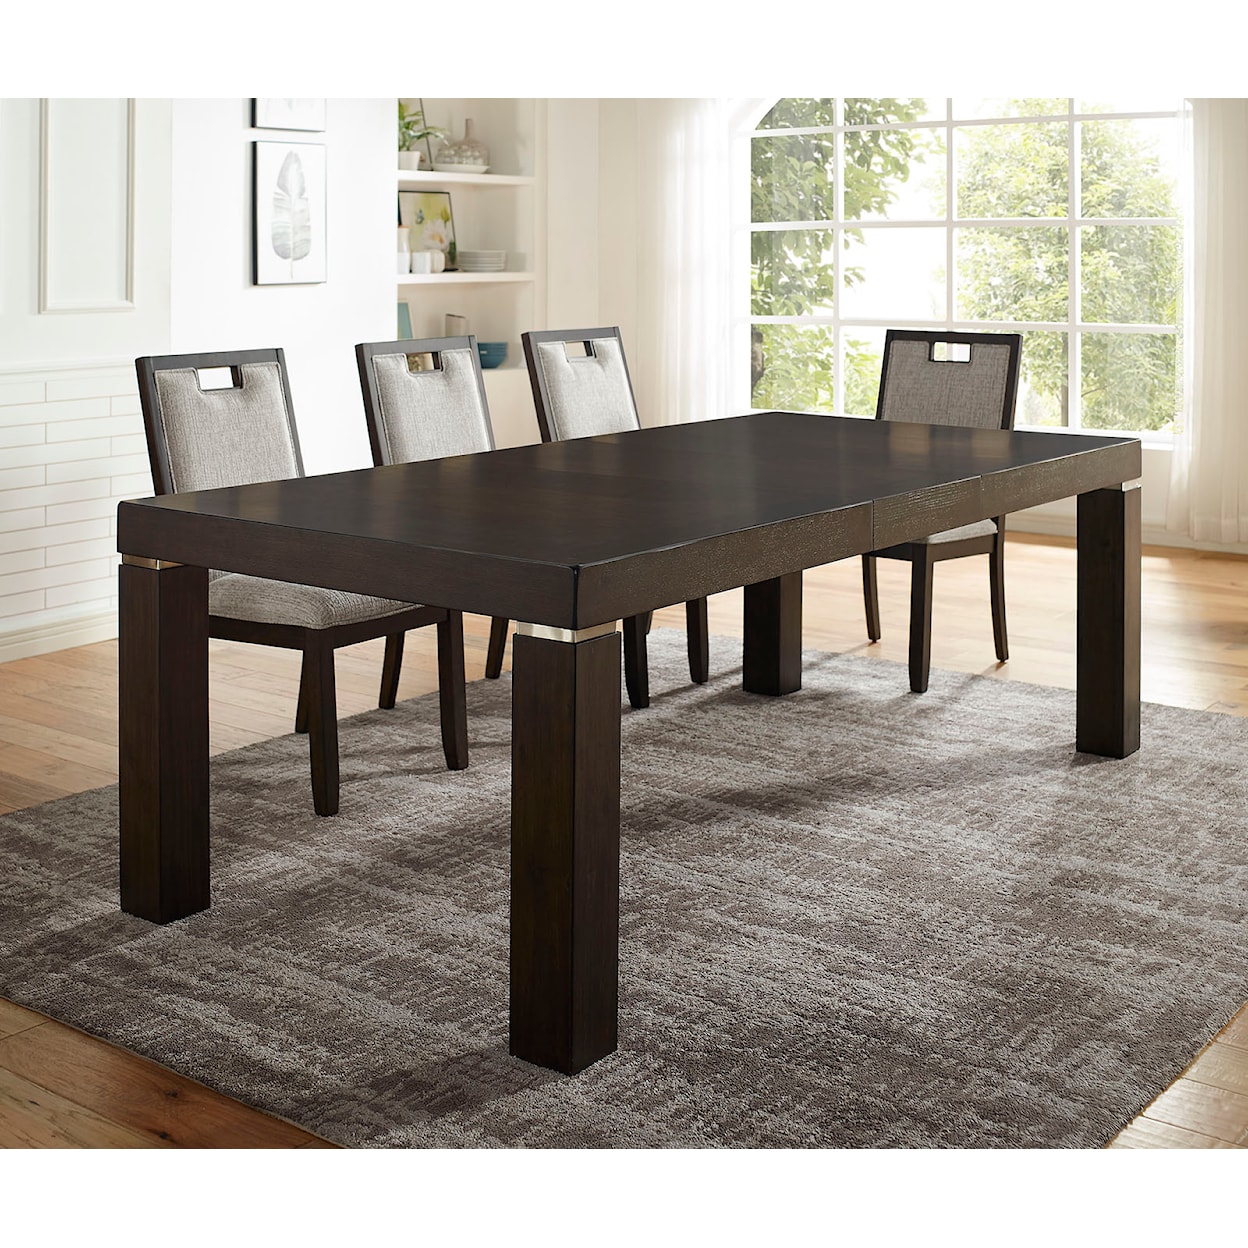 Furniture of America Caterina Dining Table